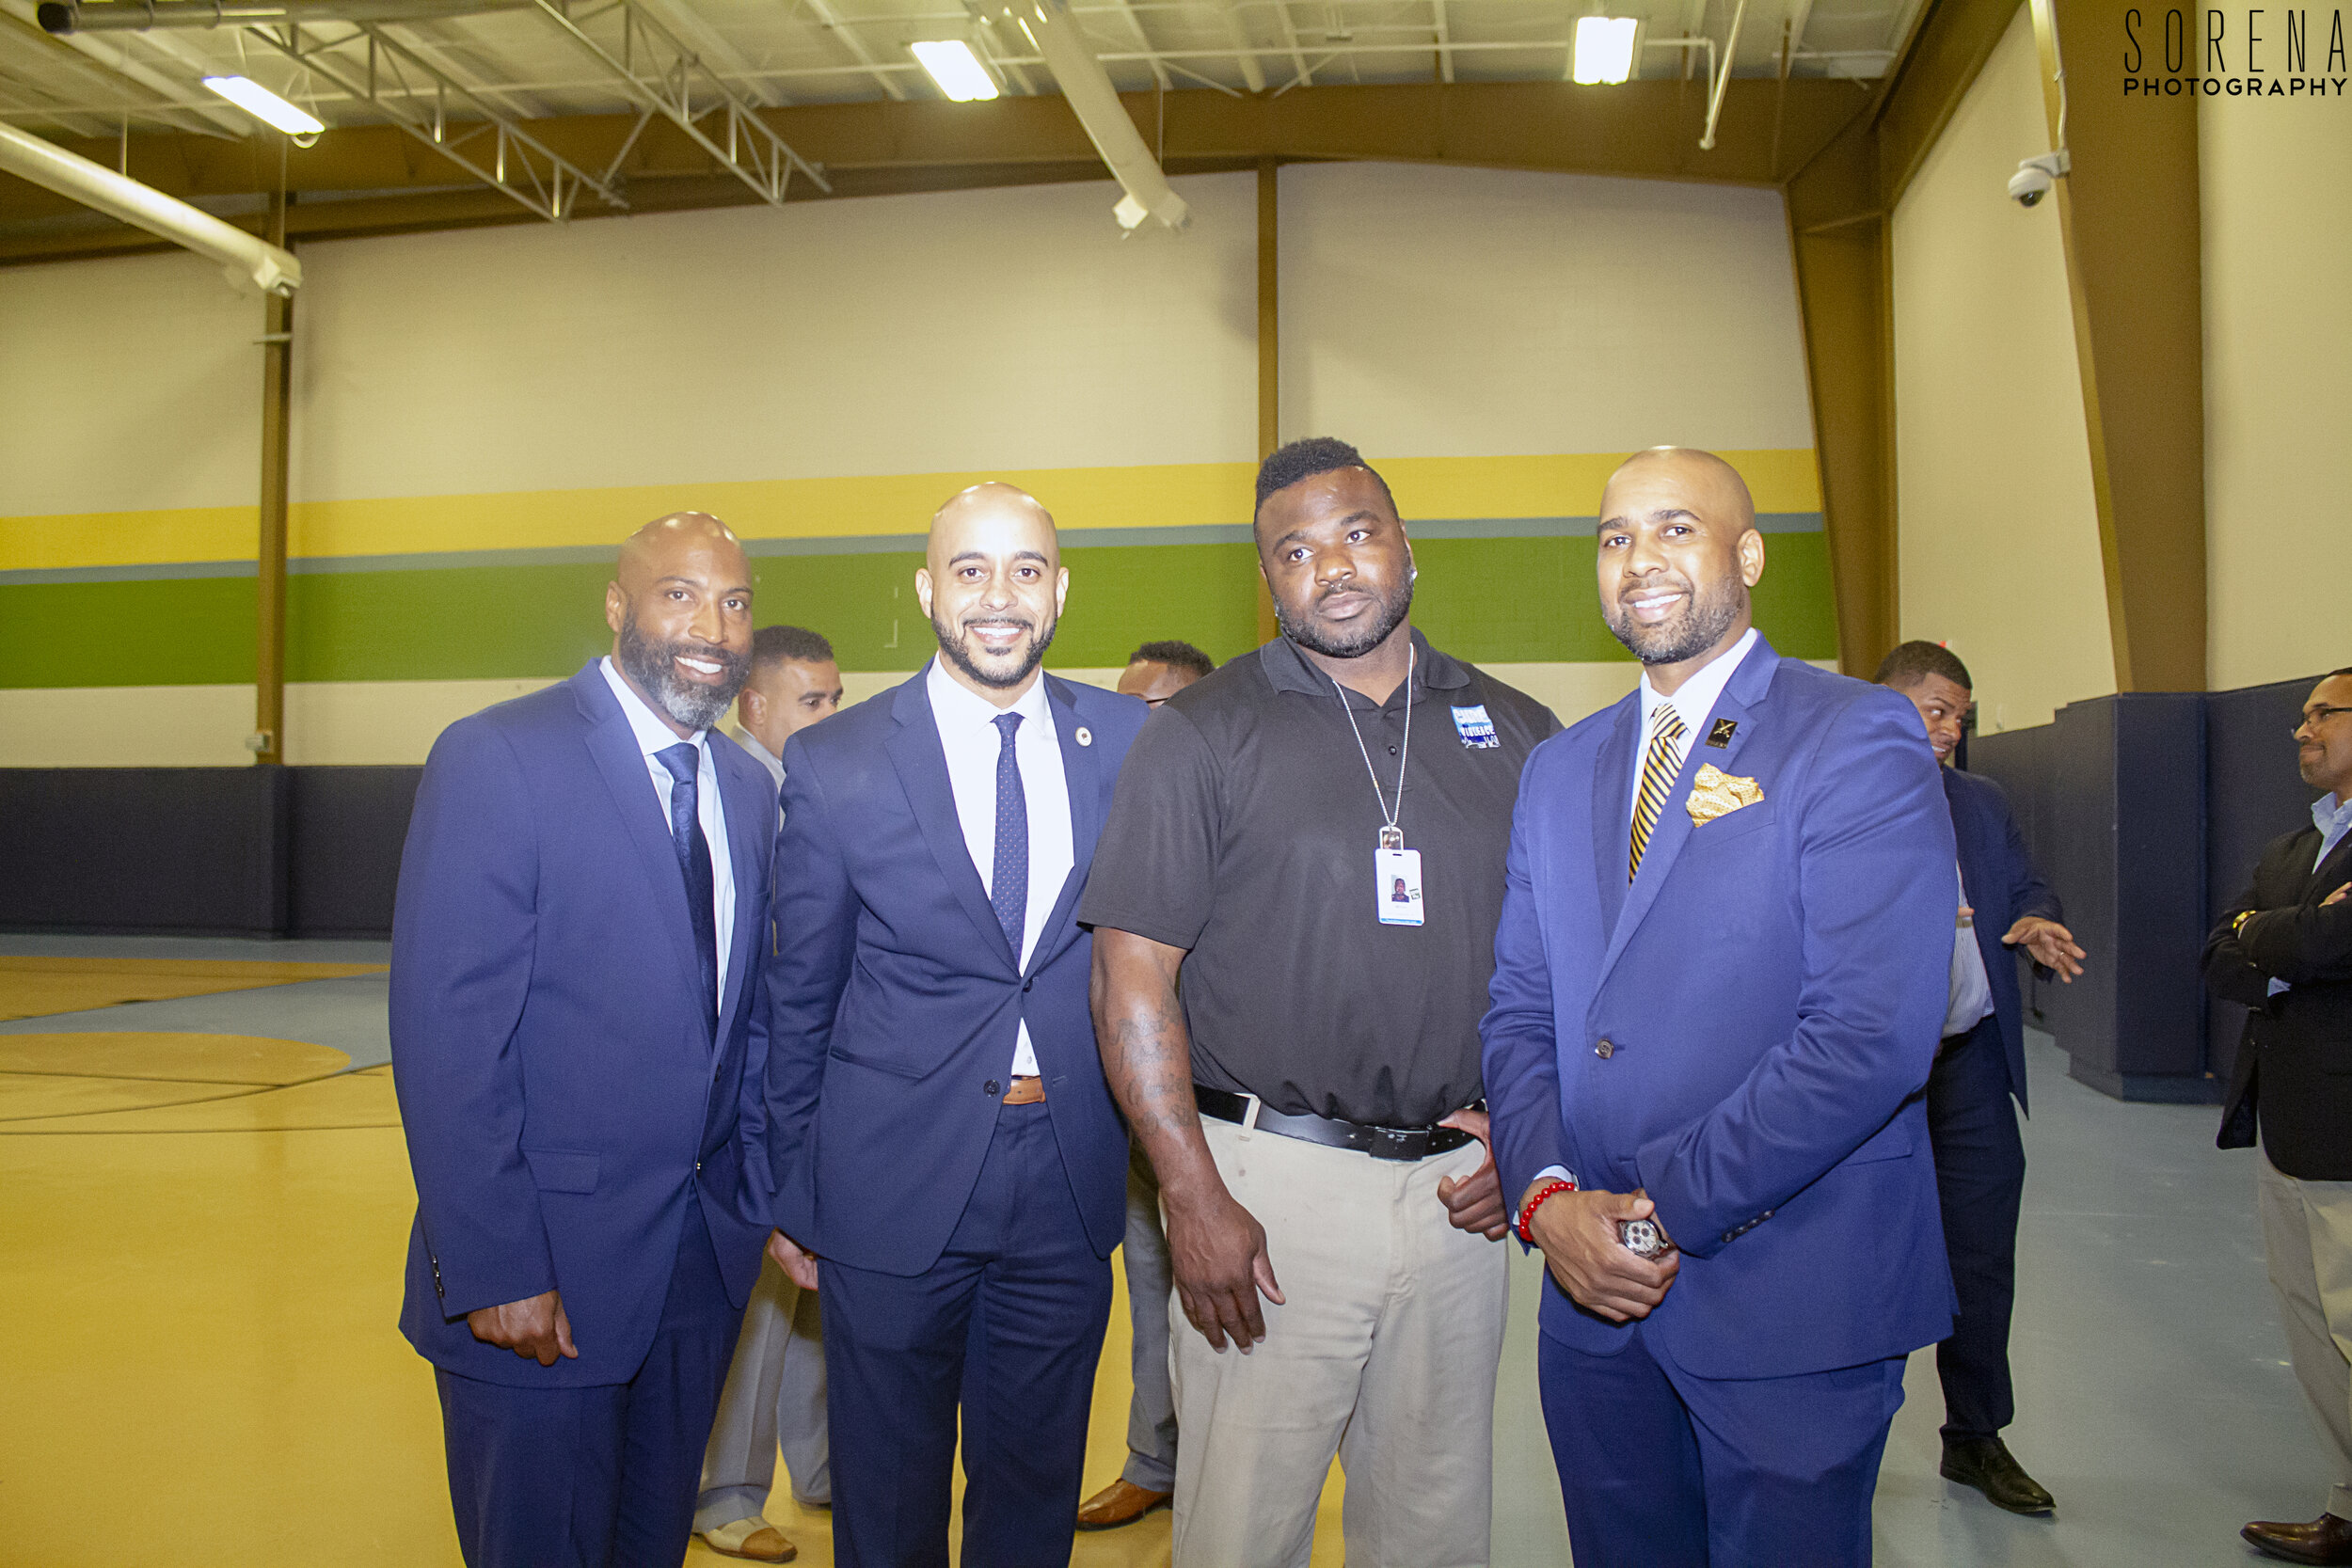 Patrick Young, Founder of SHARP MEN, stands proudly with Royce Duplessis and others at the SHARP MEN event